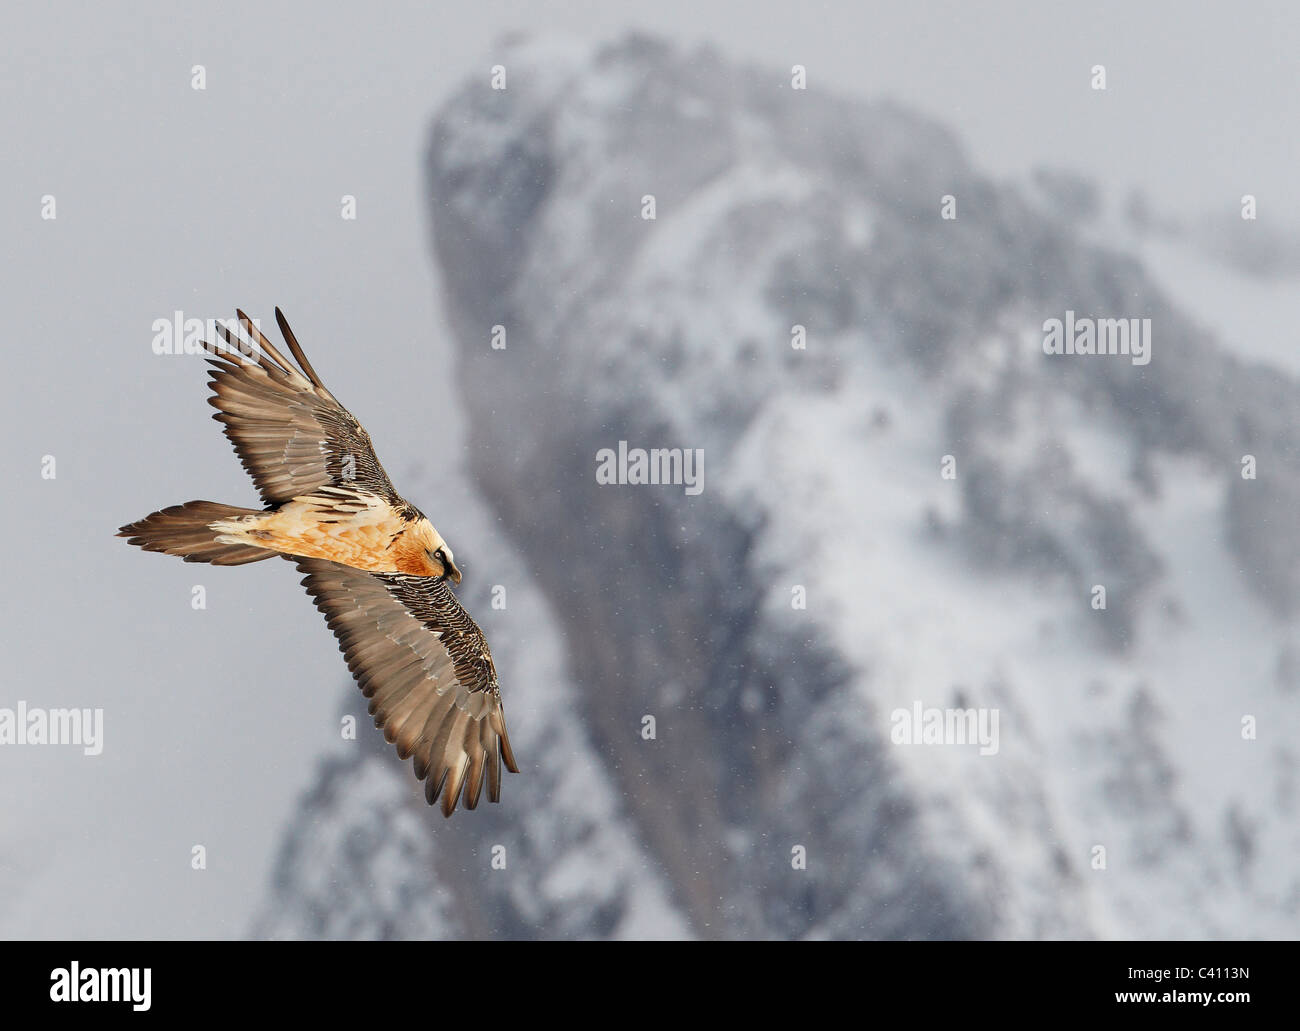 Bearded Vulture, Lammergeier (Gypaetus barbatus). Adult in flight with snowy mountain in background. Stock Photo